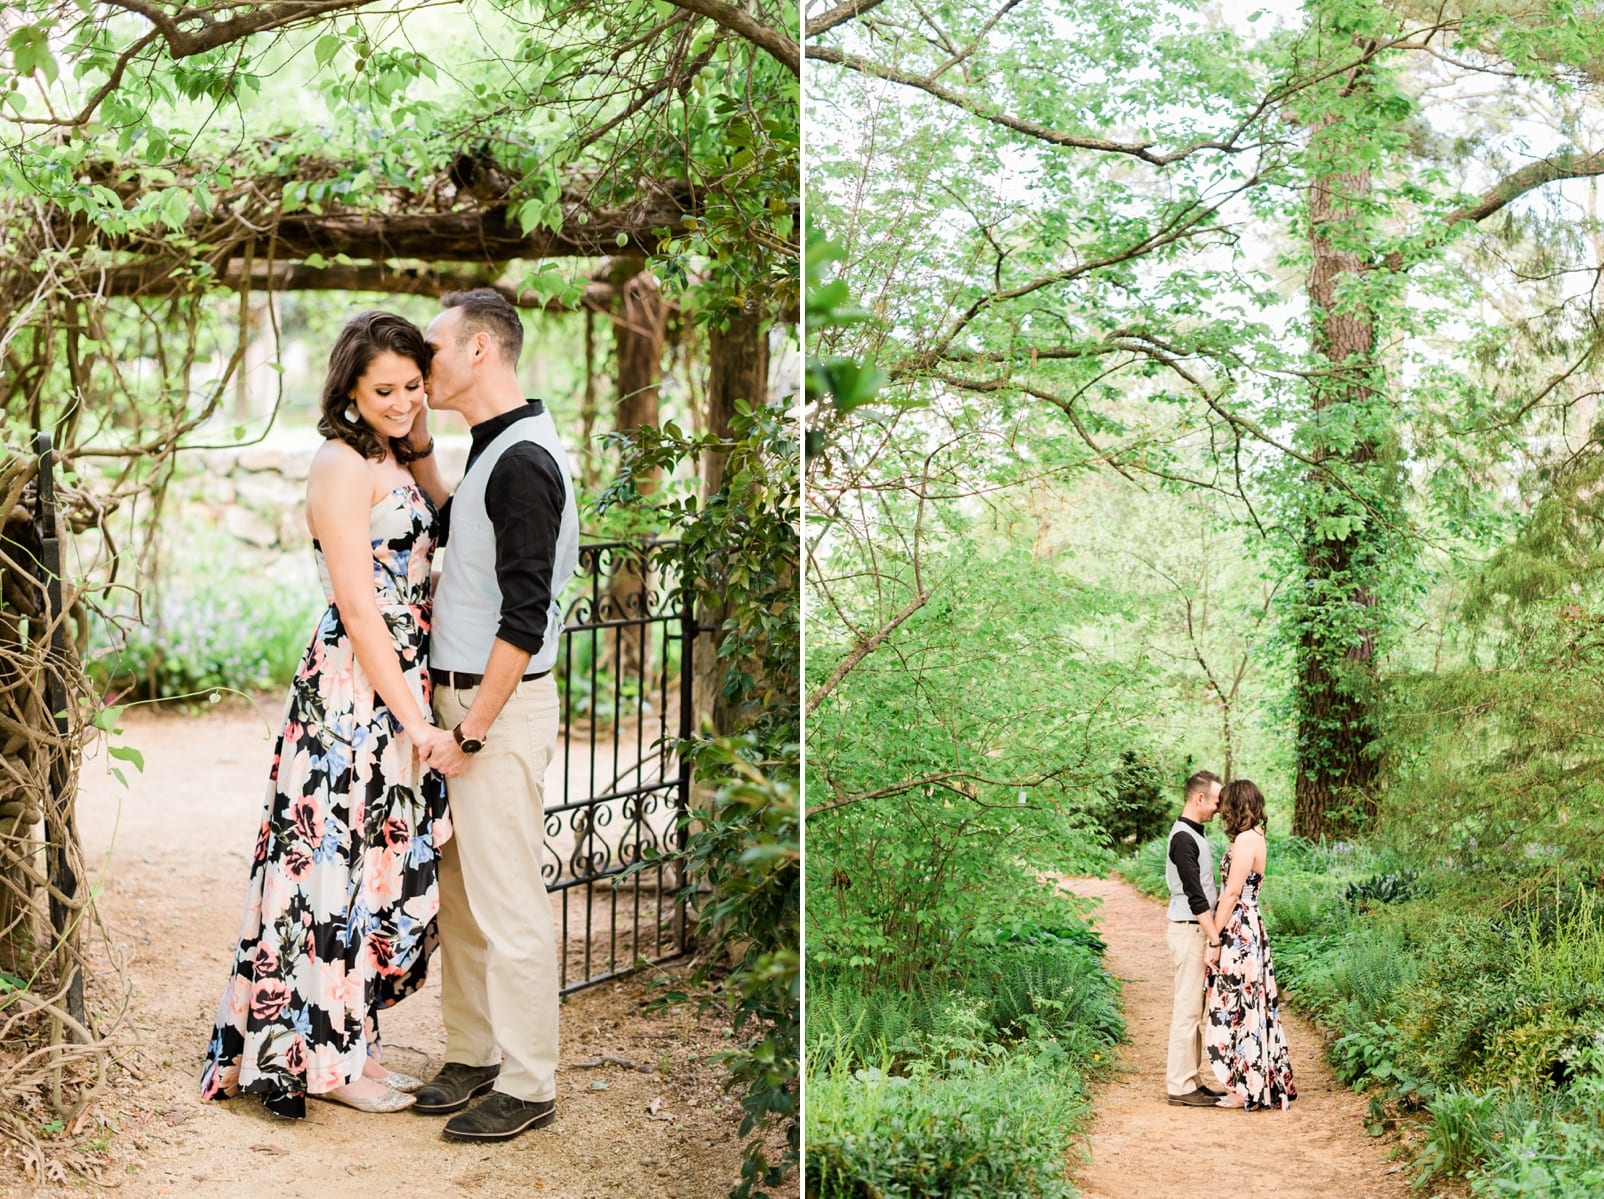 Chapel hill engagement session on a brick walking path through a wooded area photo